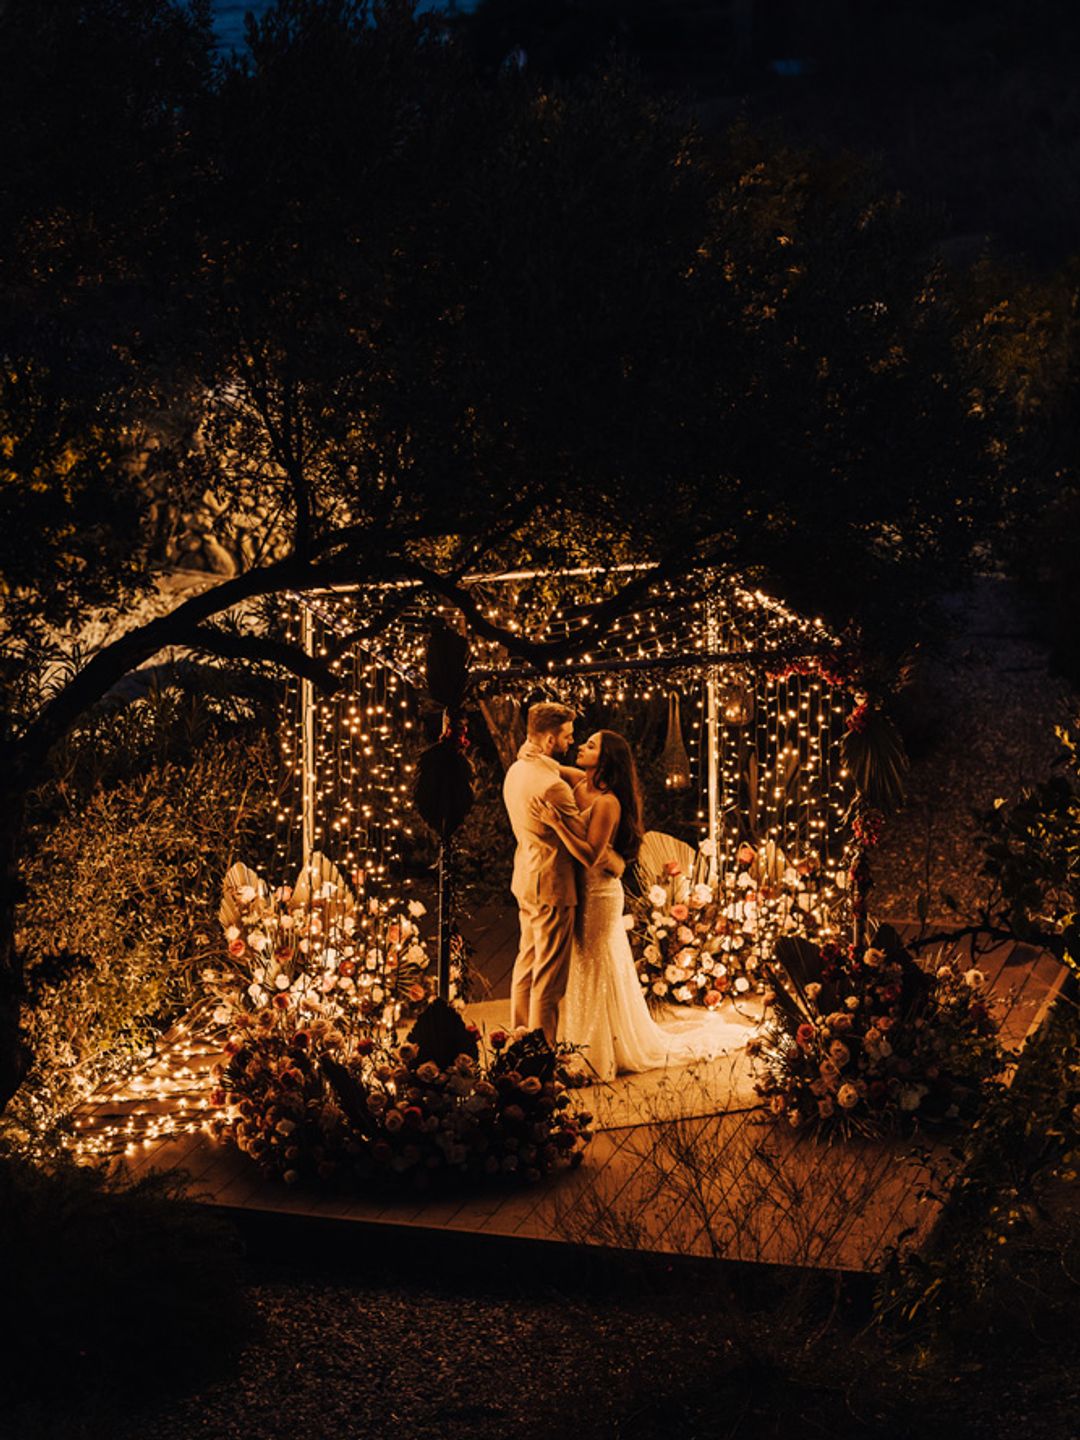 Bride and groom dancing underneath fairylights at night